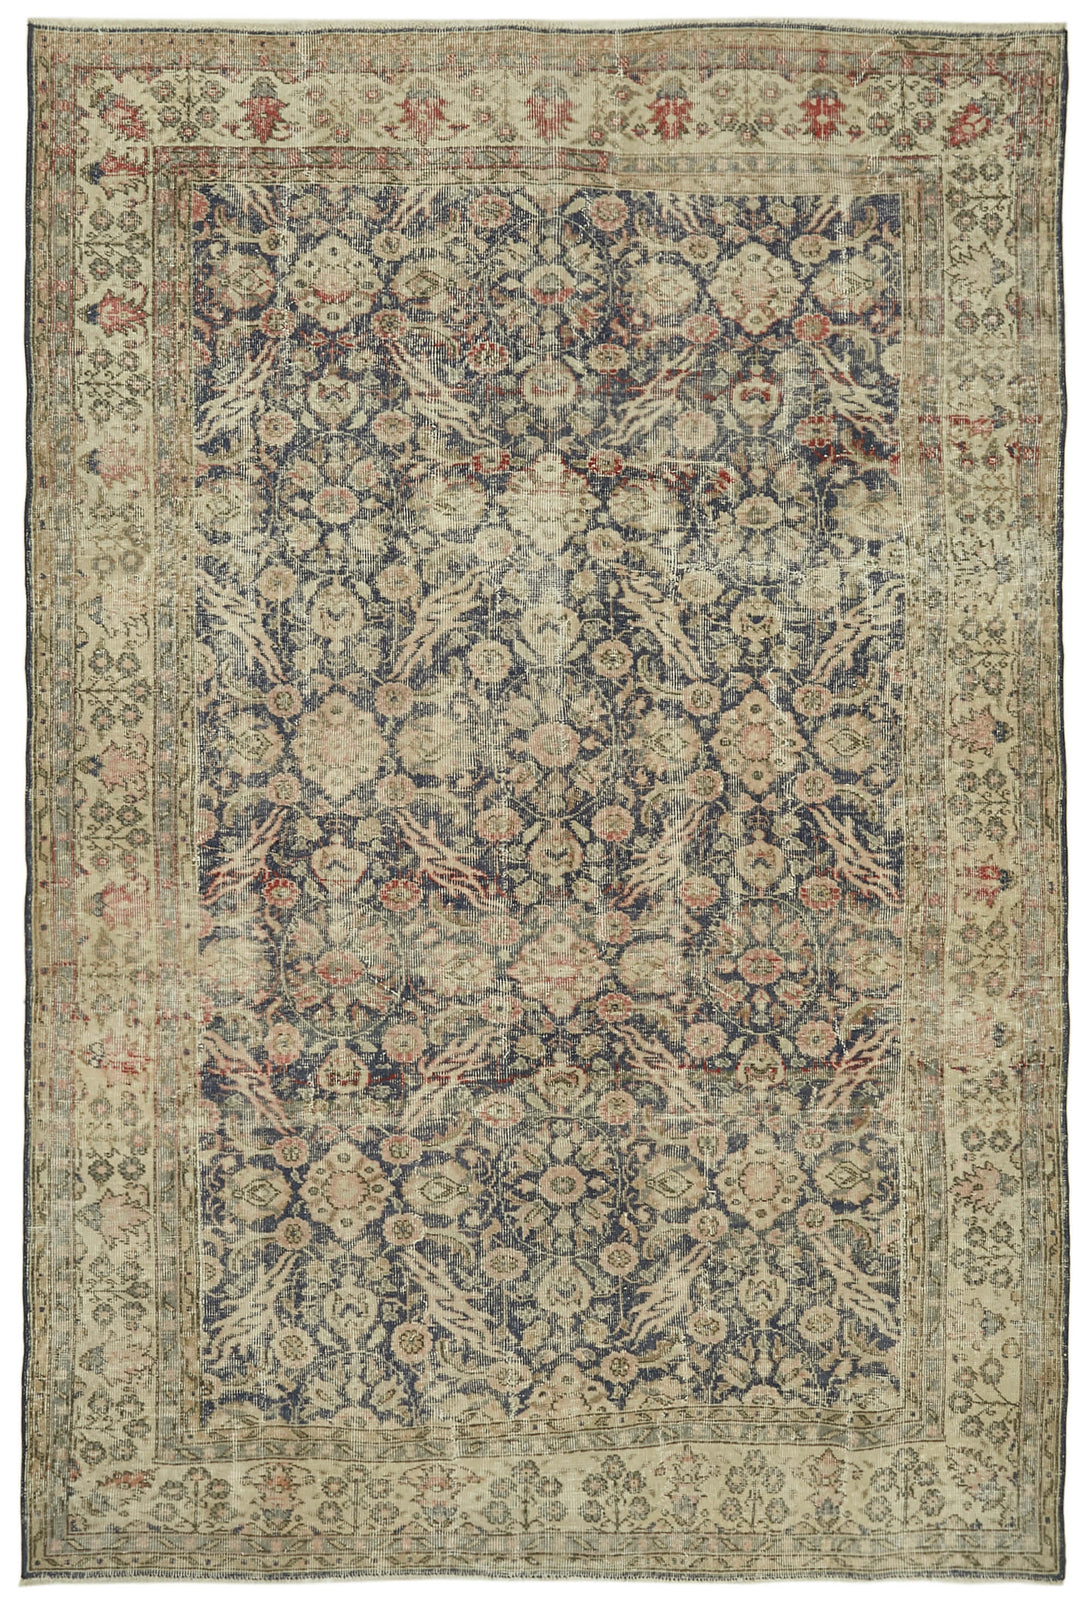 Handmade White Wash Area Rug > Design# OL-AC-41652 > Size: 6'-10" x 10'-1", Carpet Culture Rugs, Handmade Rugs, NYC Rugs, New Rugs, Shop Rugs, Rug Store, Outlet Rugs, SoHo Rugs, Rugs in USA